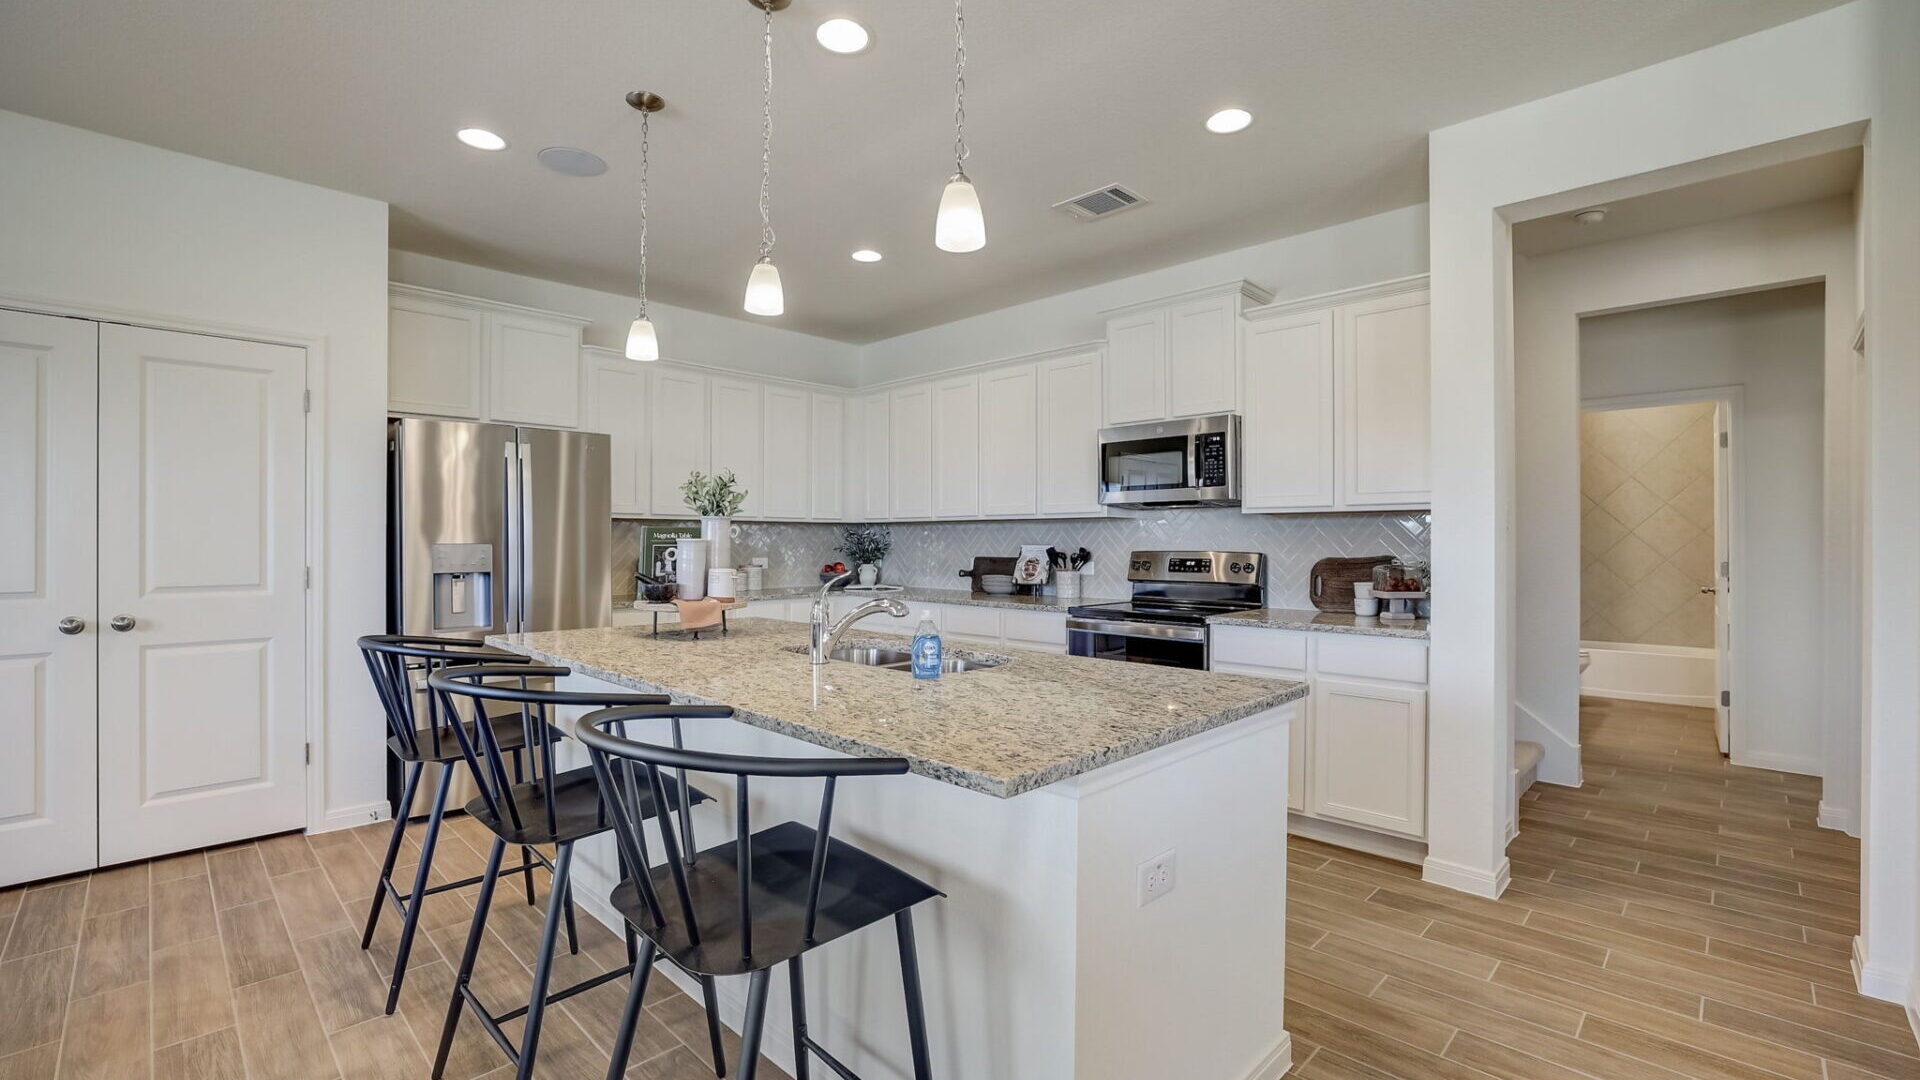 Cool Water at Sonterra - Now Open! new homes in Jarrell, TX